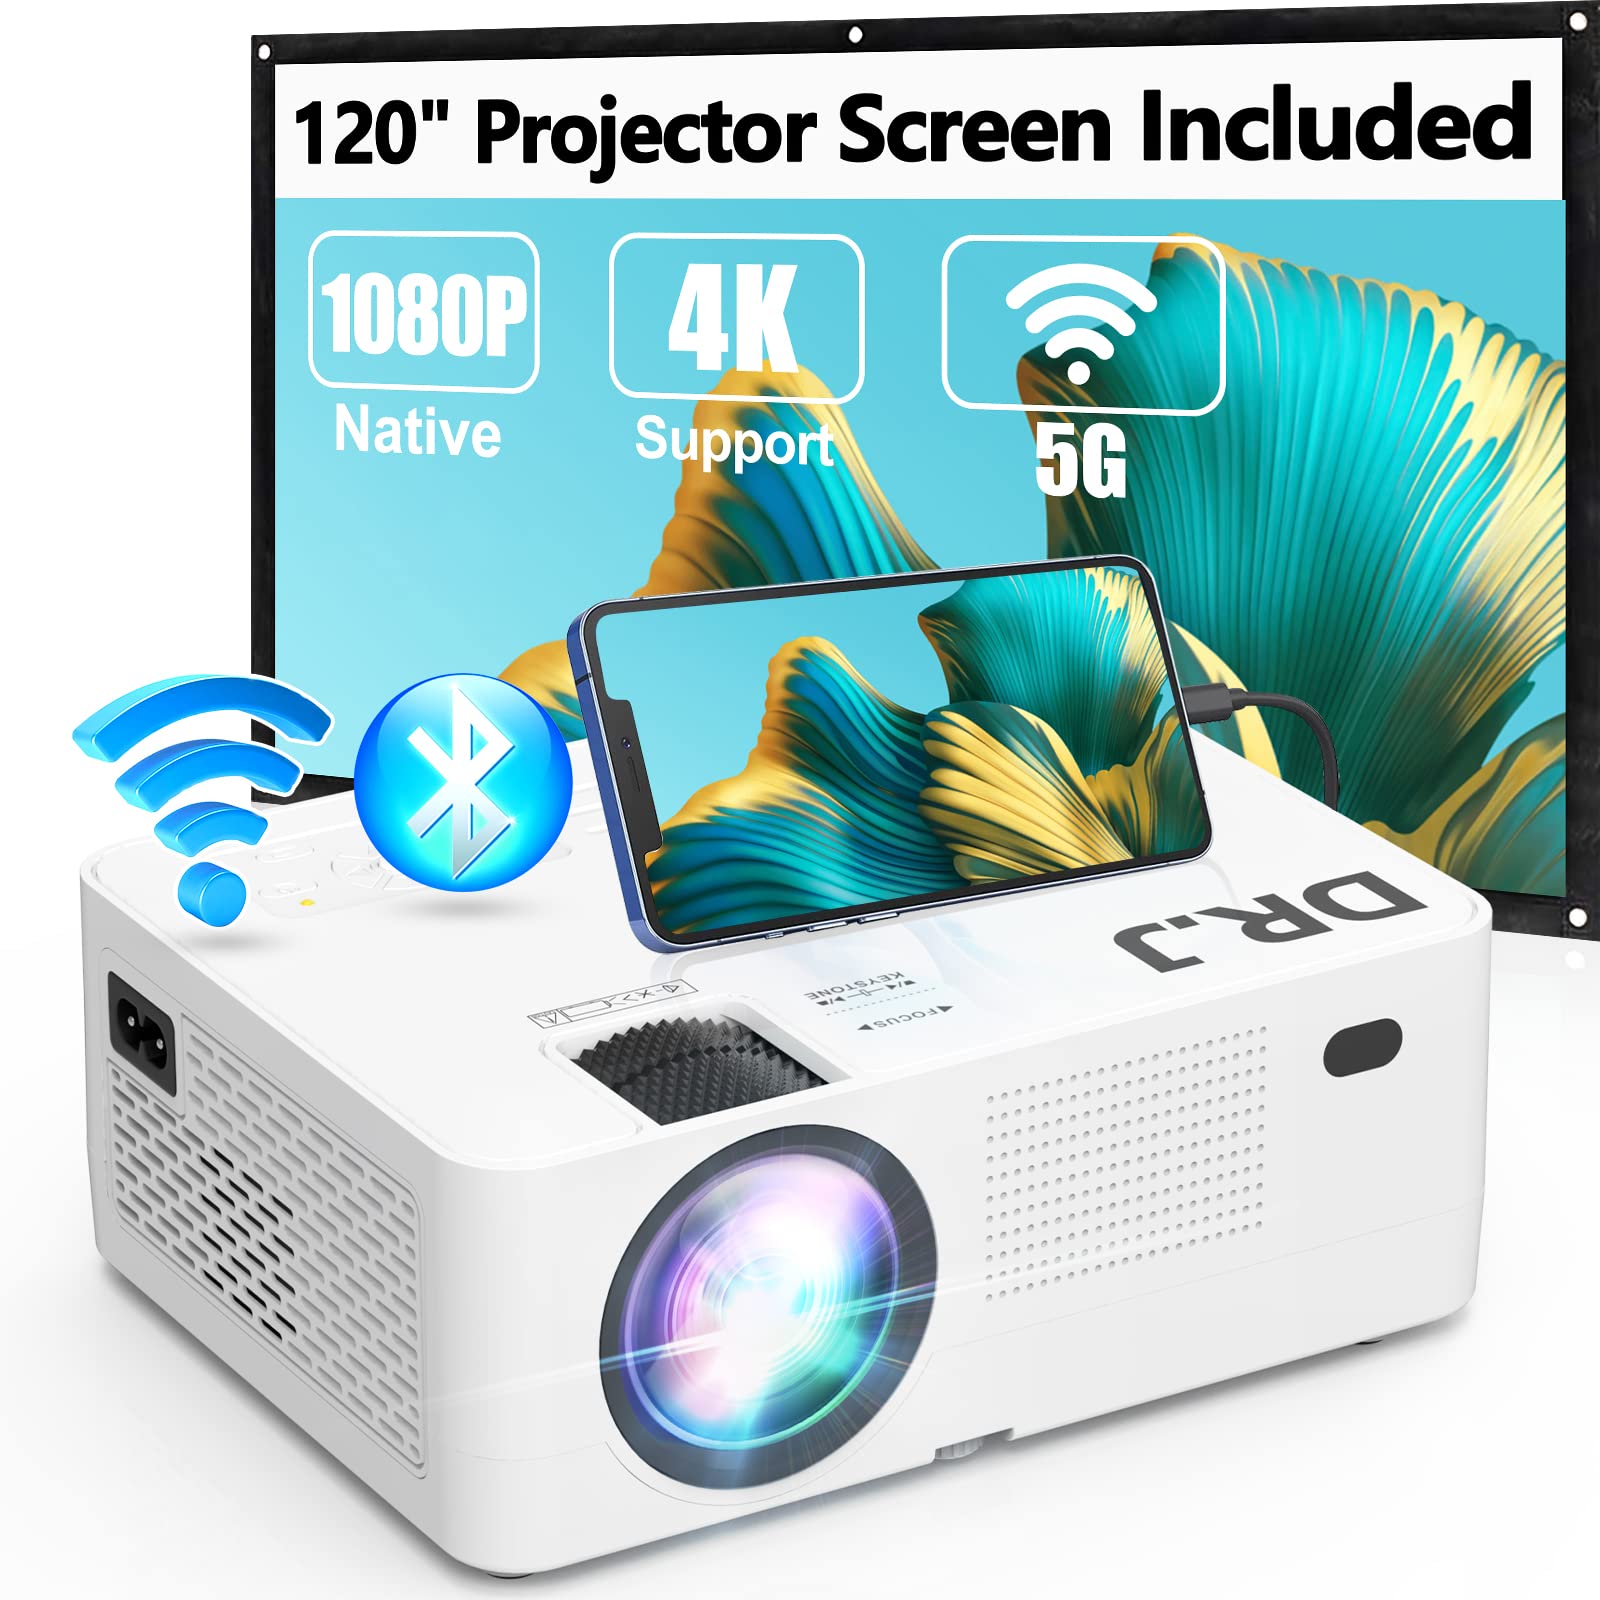 5G WiFi Bluetooth Projector, Full HD Native 1080P Projector 13000Lumens with Wireless Mirroring Screen, Compatible with TV Stick/HDMI/DVD Player/AV for Theater Movies [120